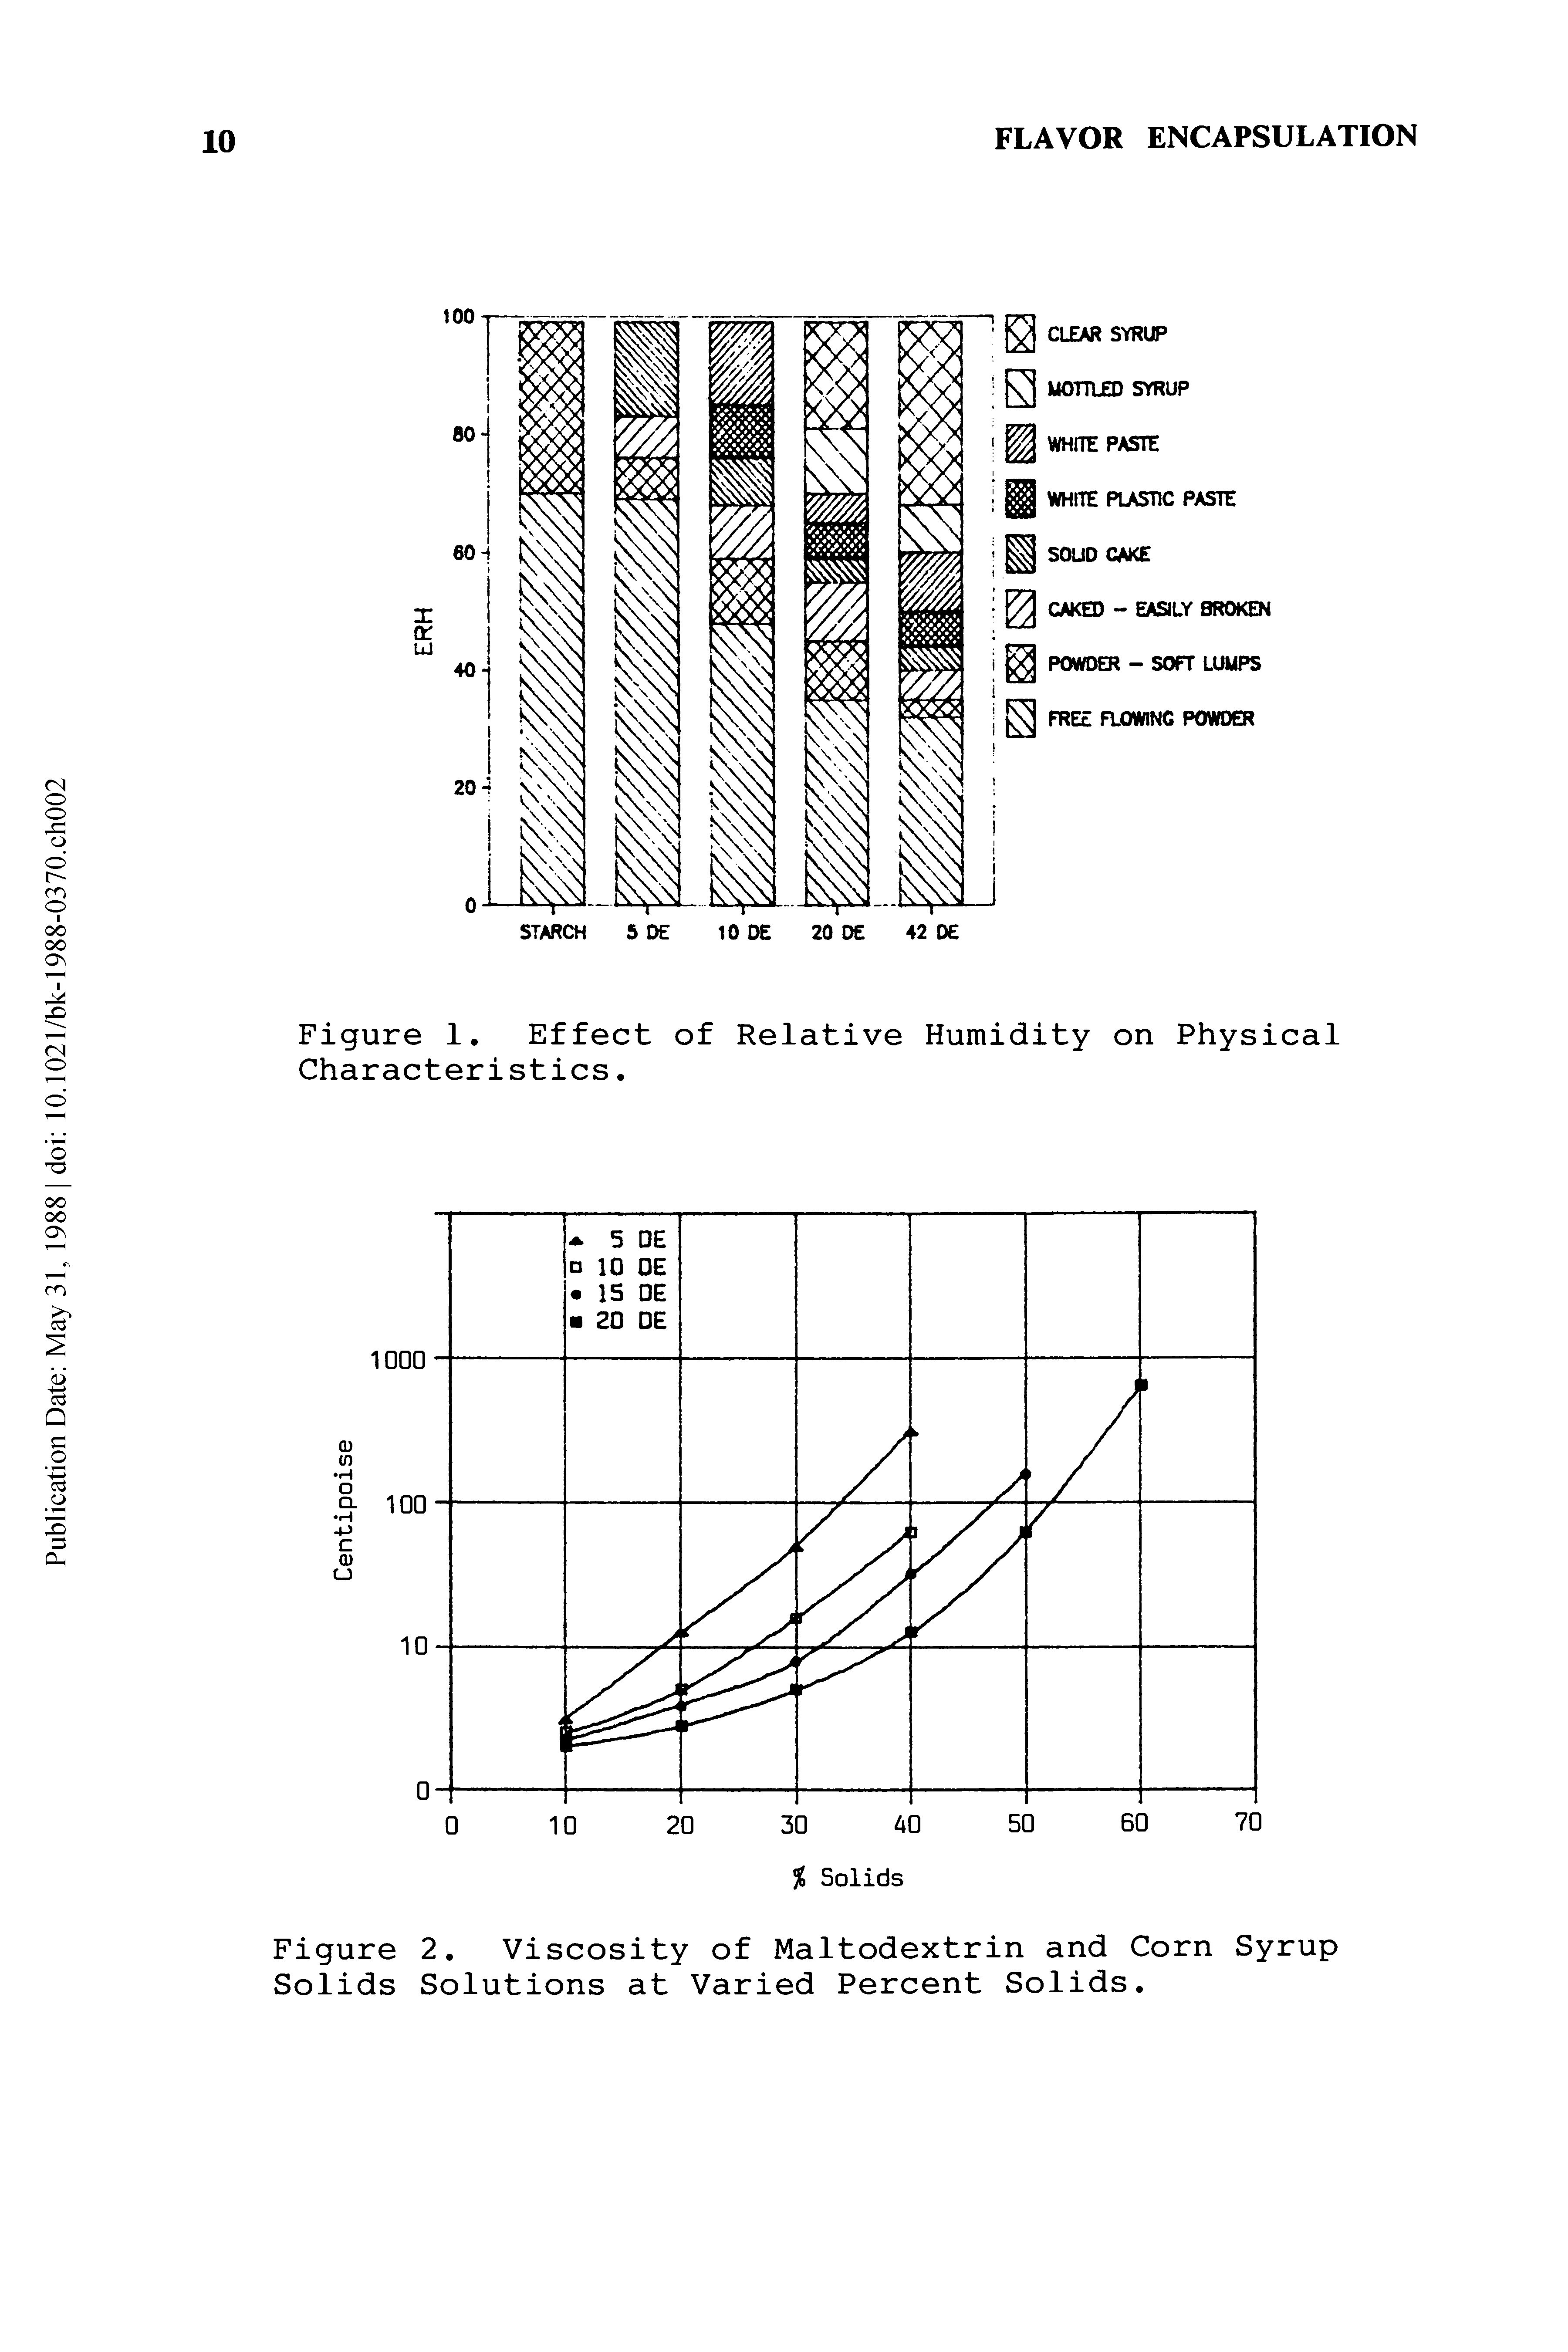 Figure 2. Viscosity of Maltodextrin and Corn Syrup Solids Solutions at Varied Percent Solids.